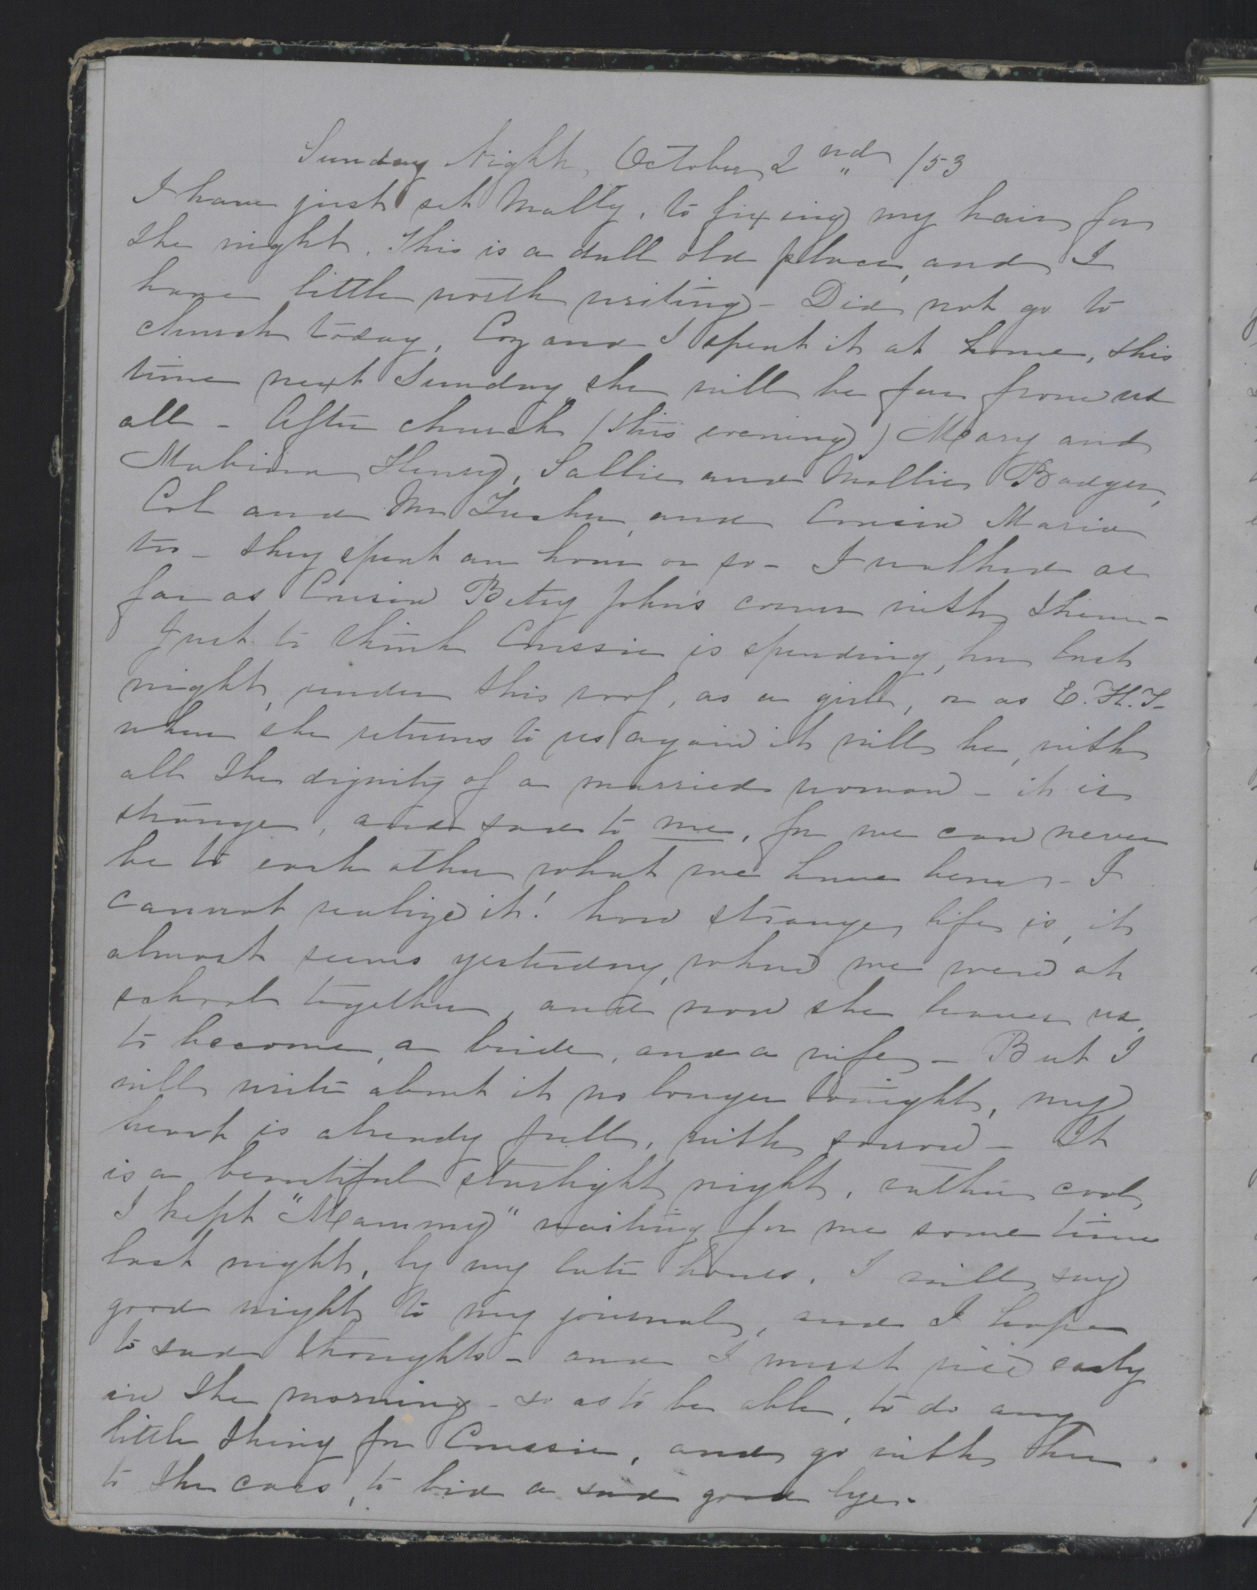 Diary Entry from Margaret Eliza Cotten, 2 October 1853